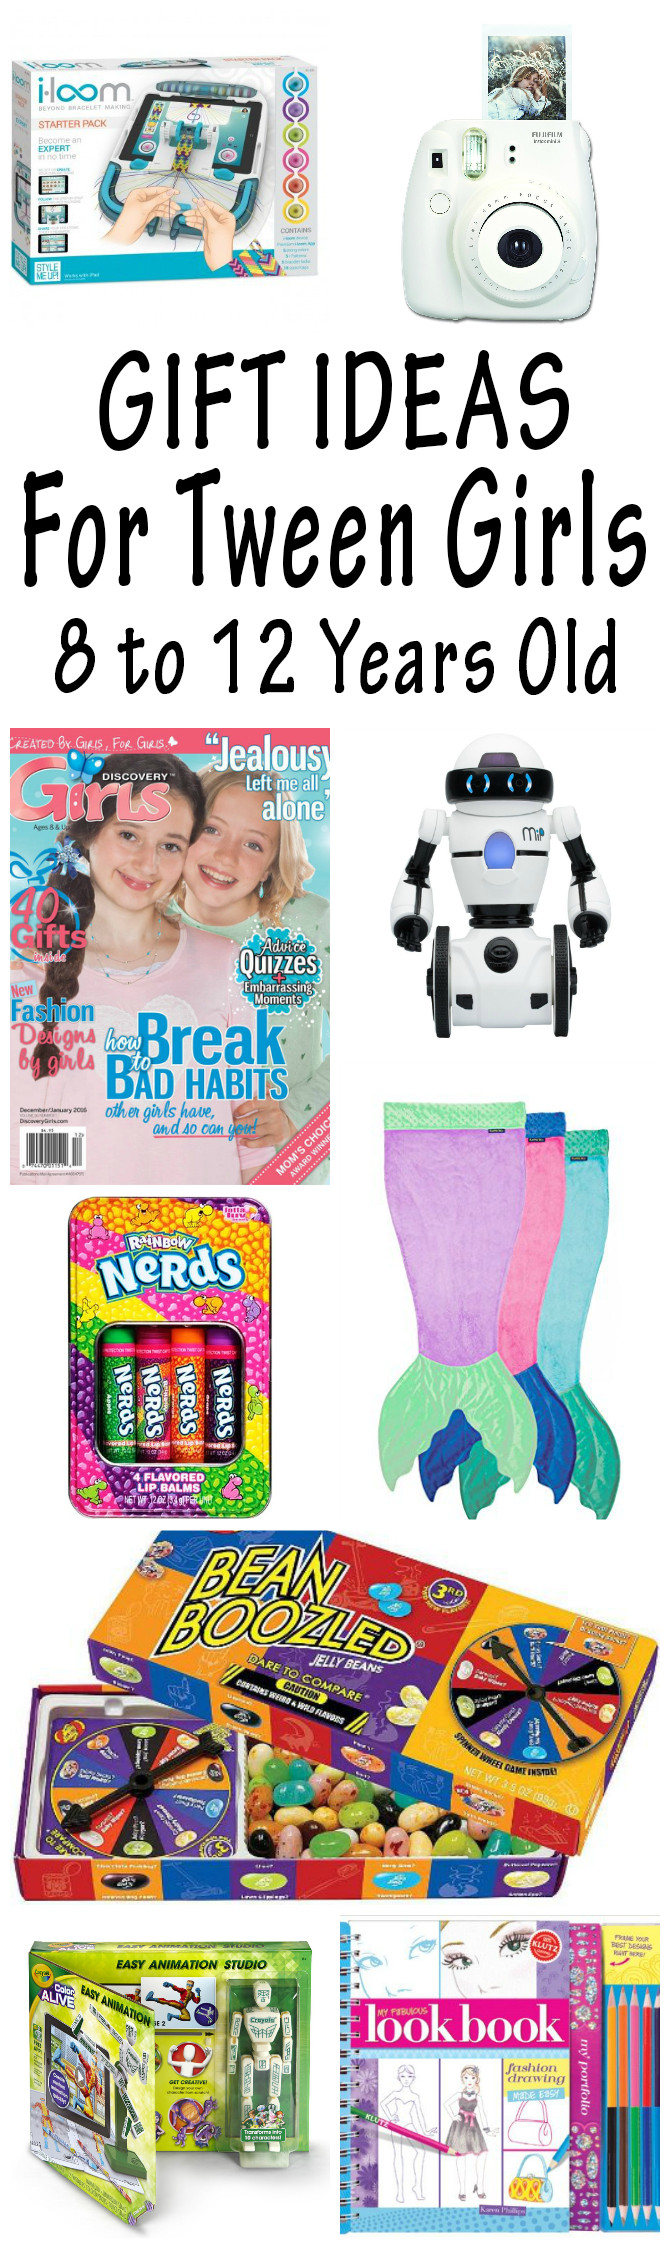 24 Of the Best Ideas for Gift Ideas for Girls Age 12 – Home, Family